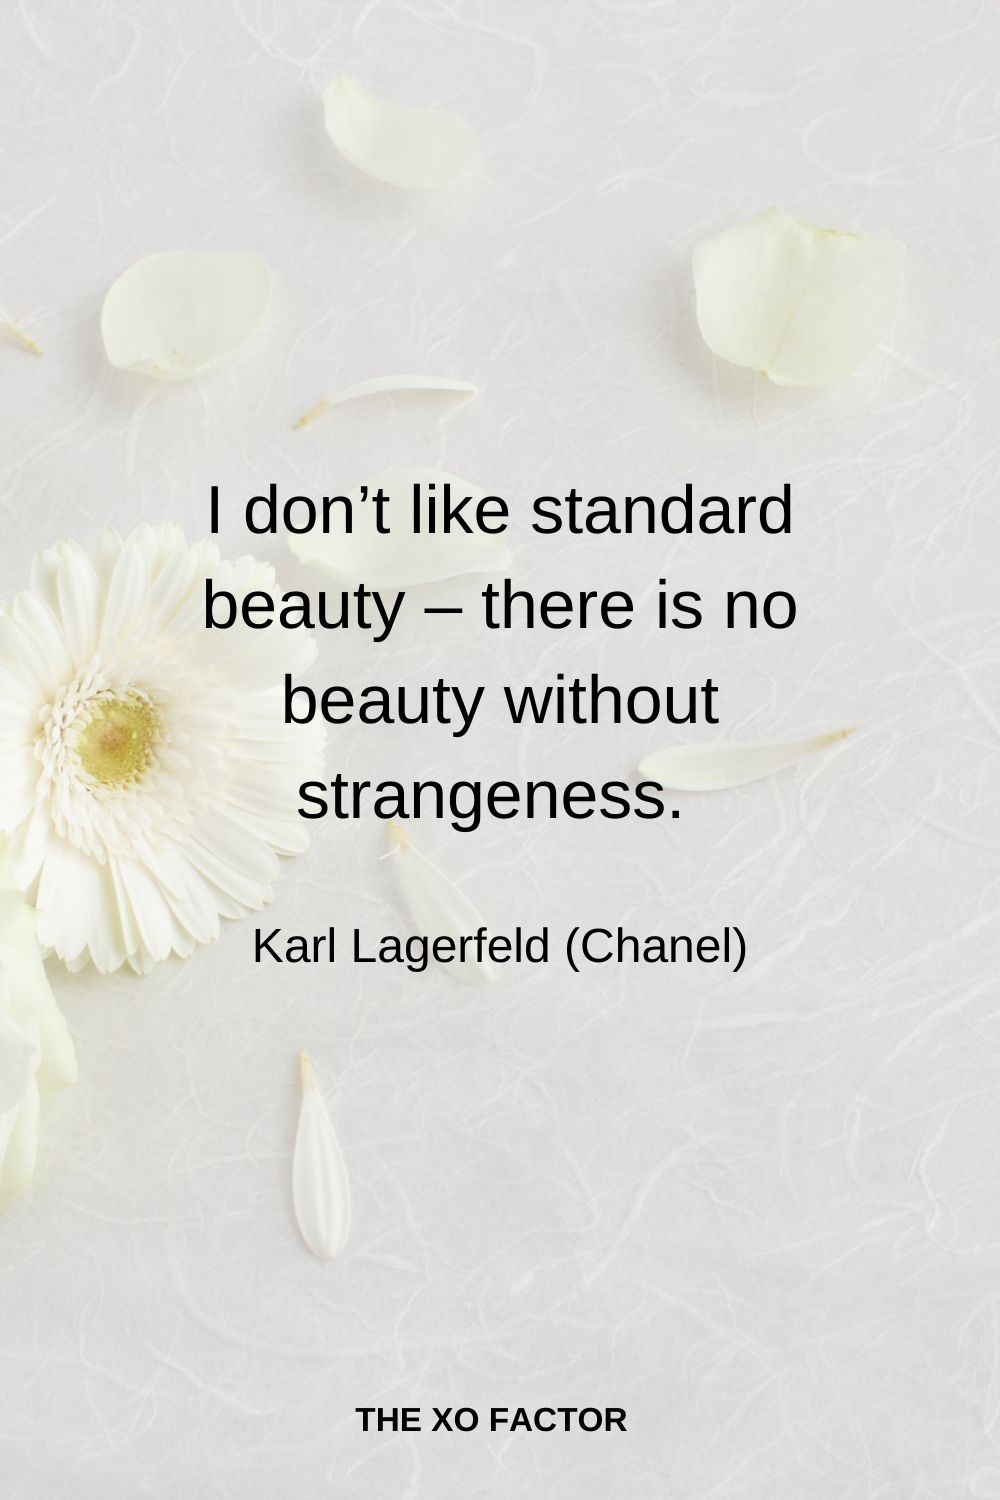 I don’t like standard beauty – there is no beauty without strangeness.  Karl Lagerfeld (Chanel)